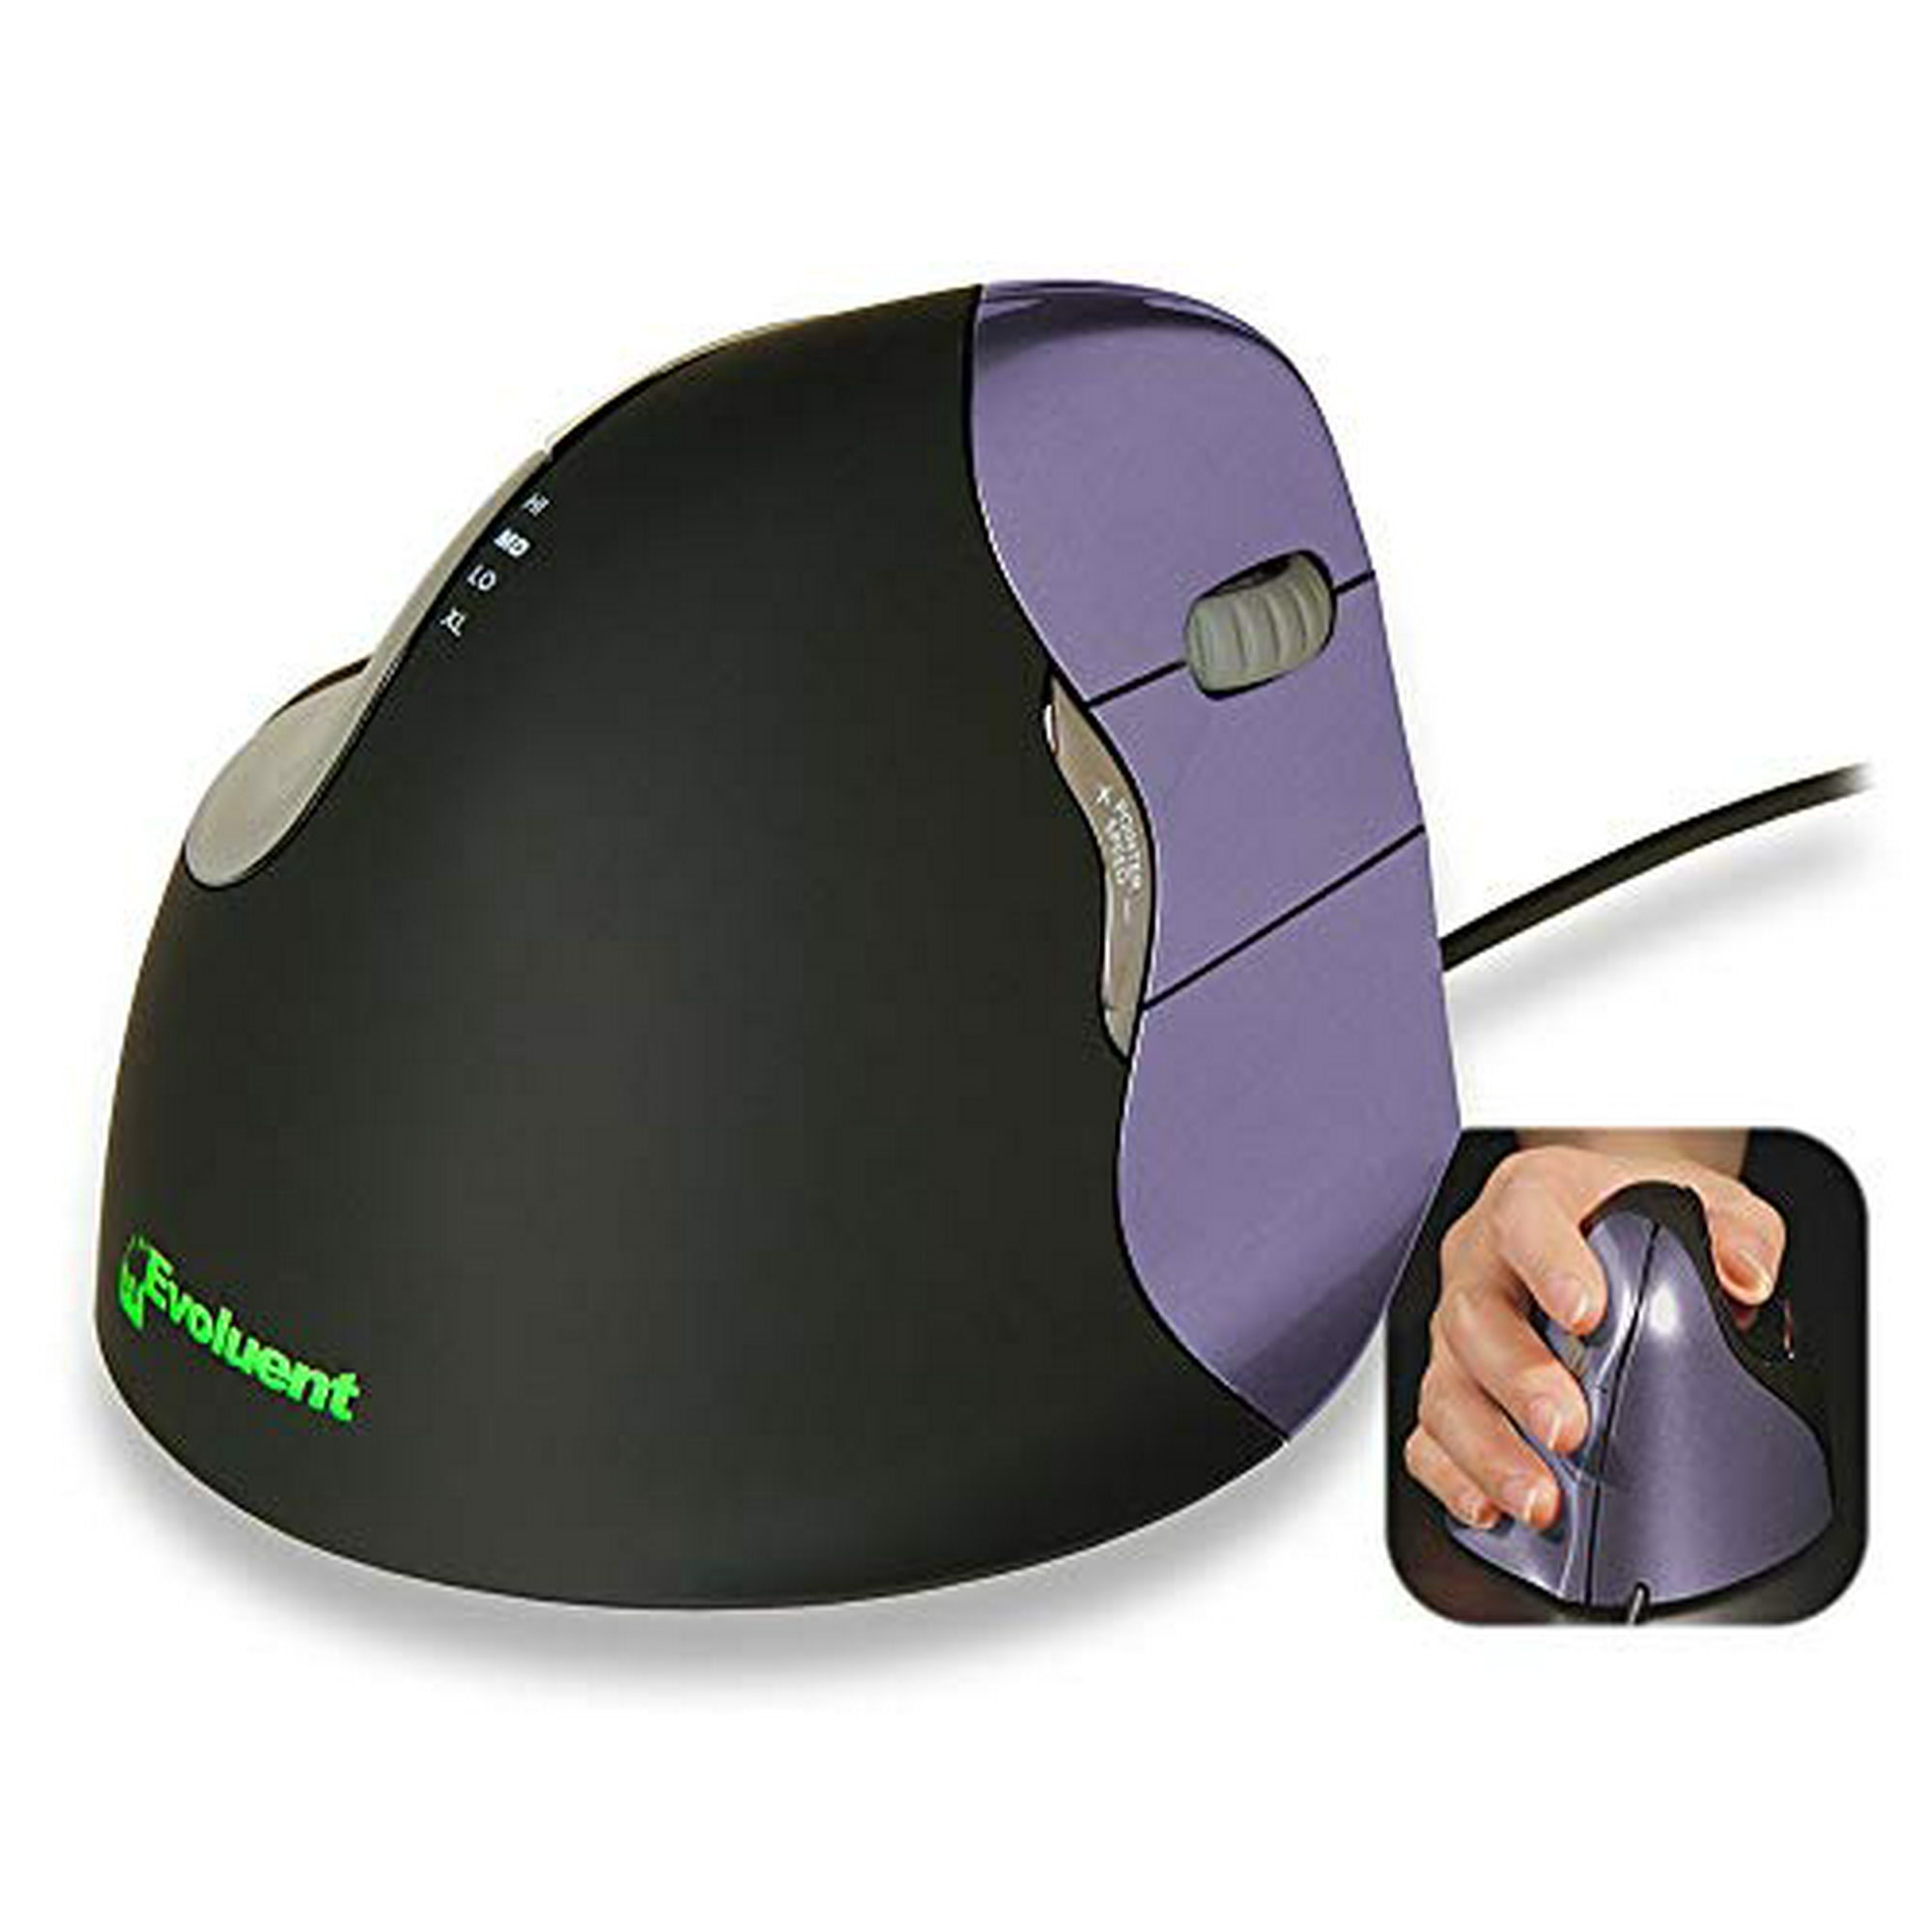 Evoluent Vm4s Verticalmouse 4 Right Hand Ergonomic Mouse With Wired Usb Connection Small Size Walmart Canada